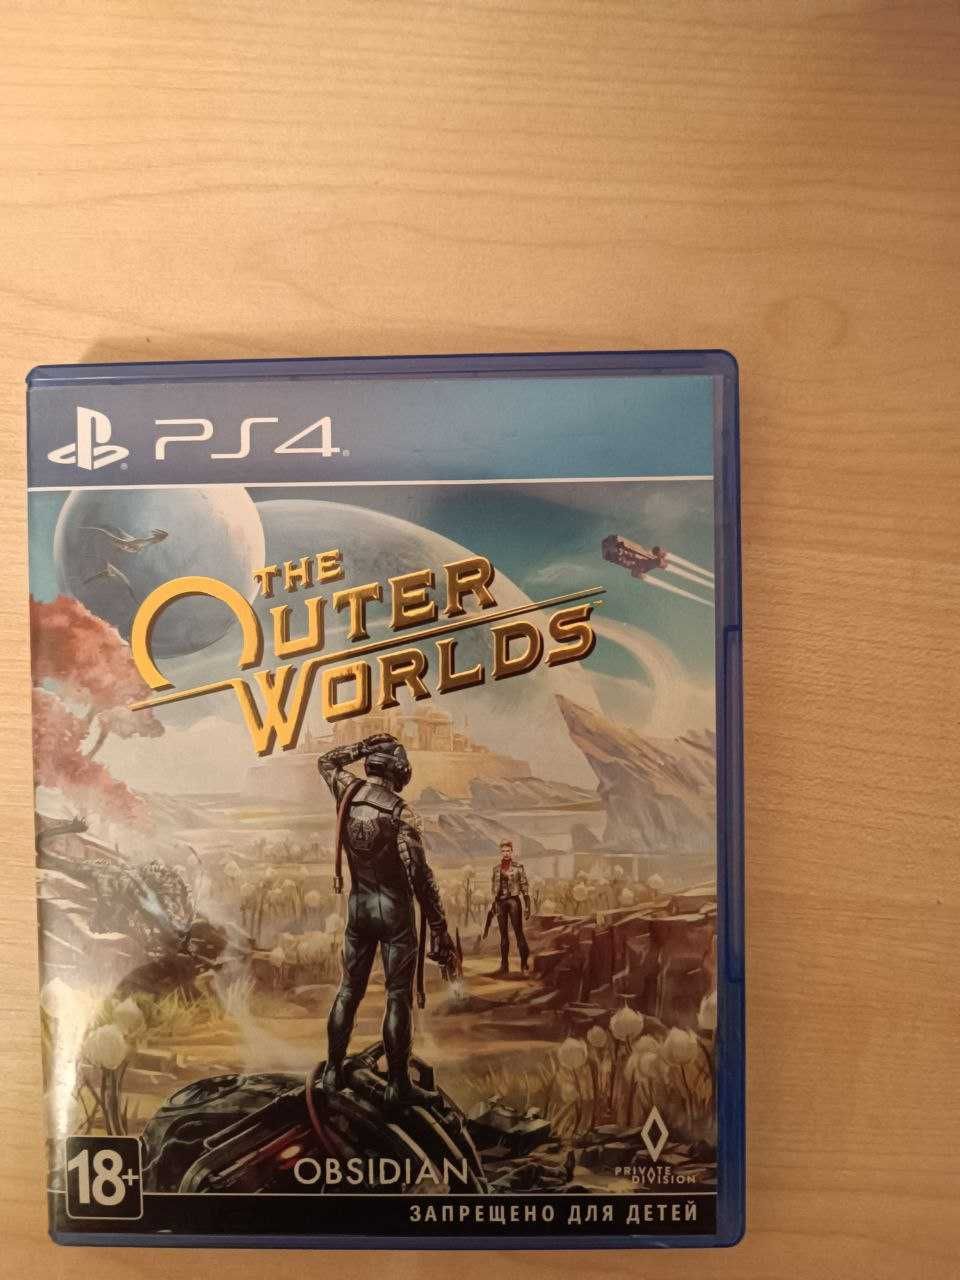 Продаж гри The Outer Worlds на PS4